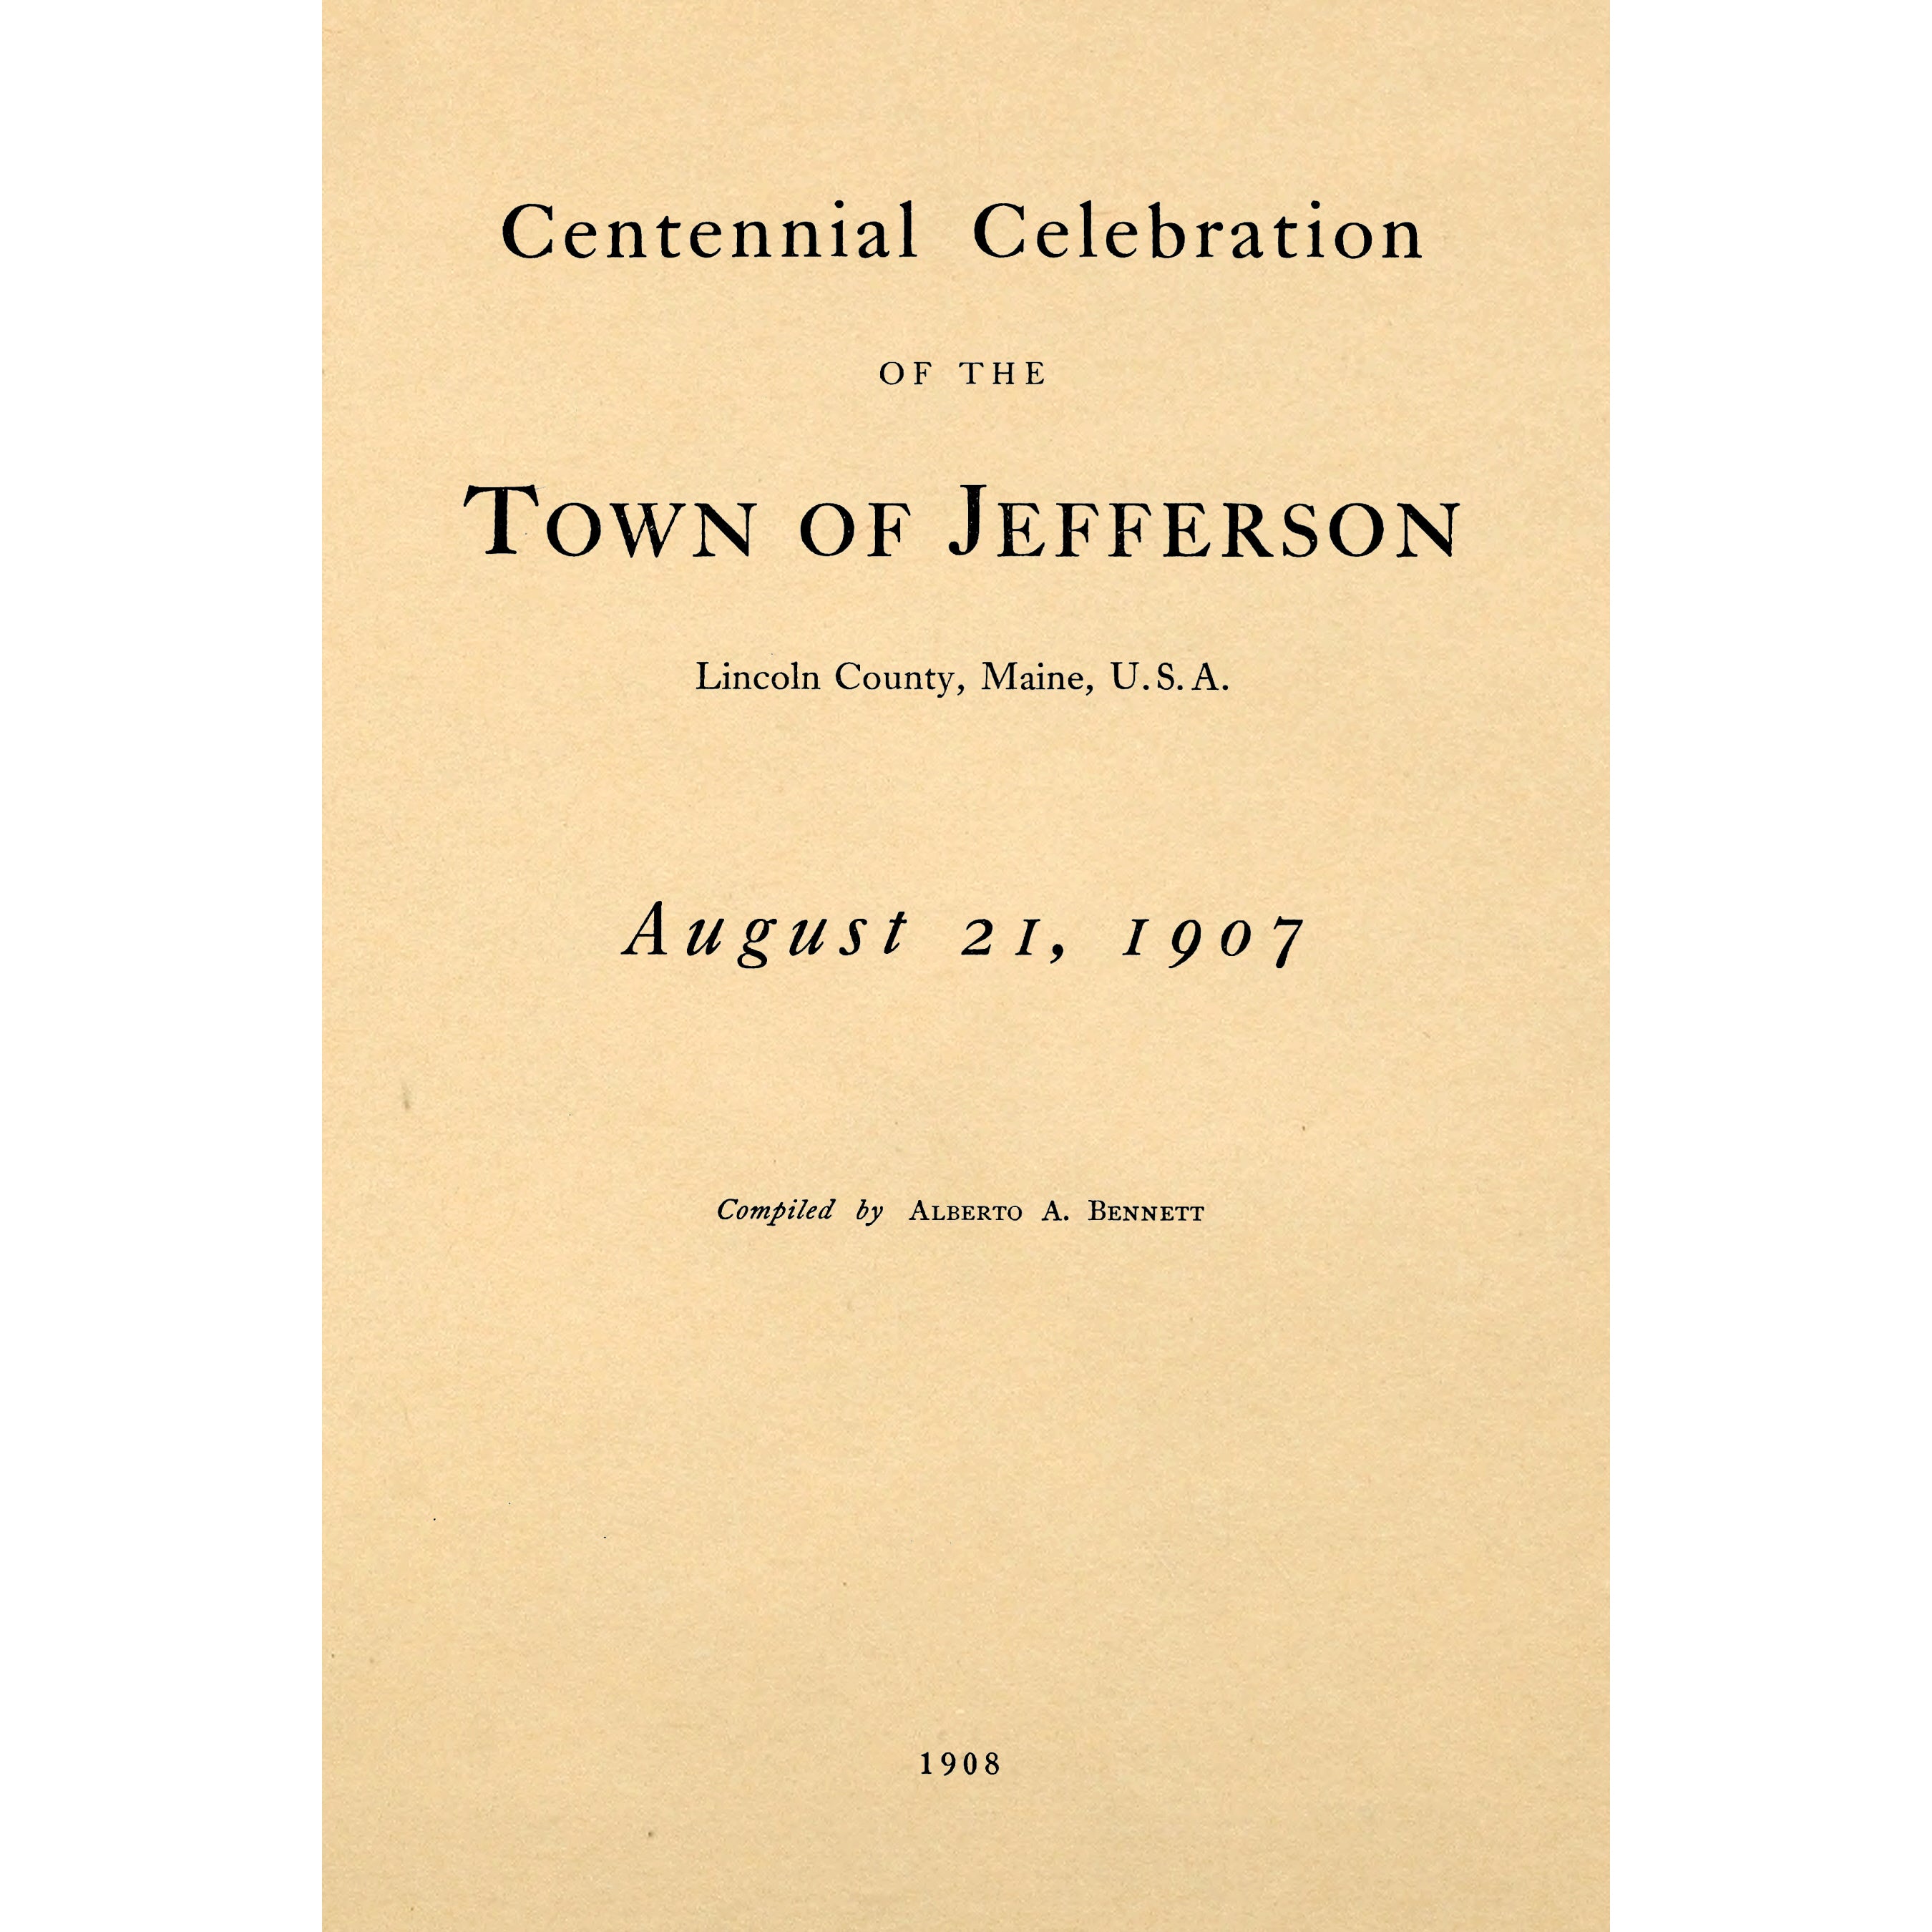 Centennial celebration of the town of Jefferson, Lincoln County, Maine, U.S.A., August 21, 1907